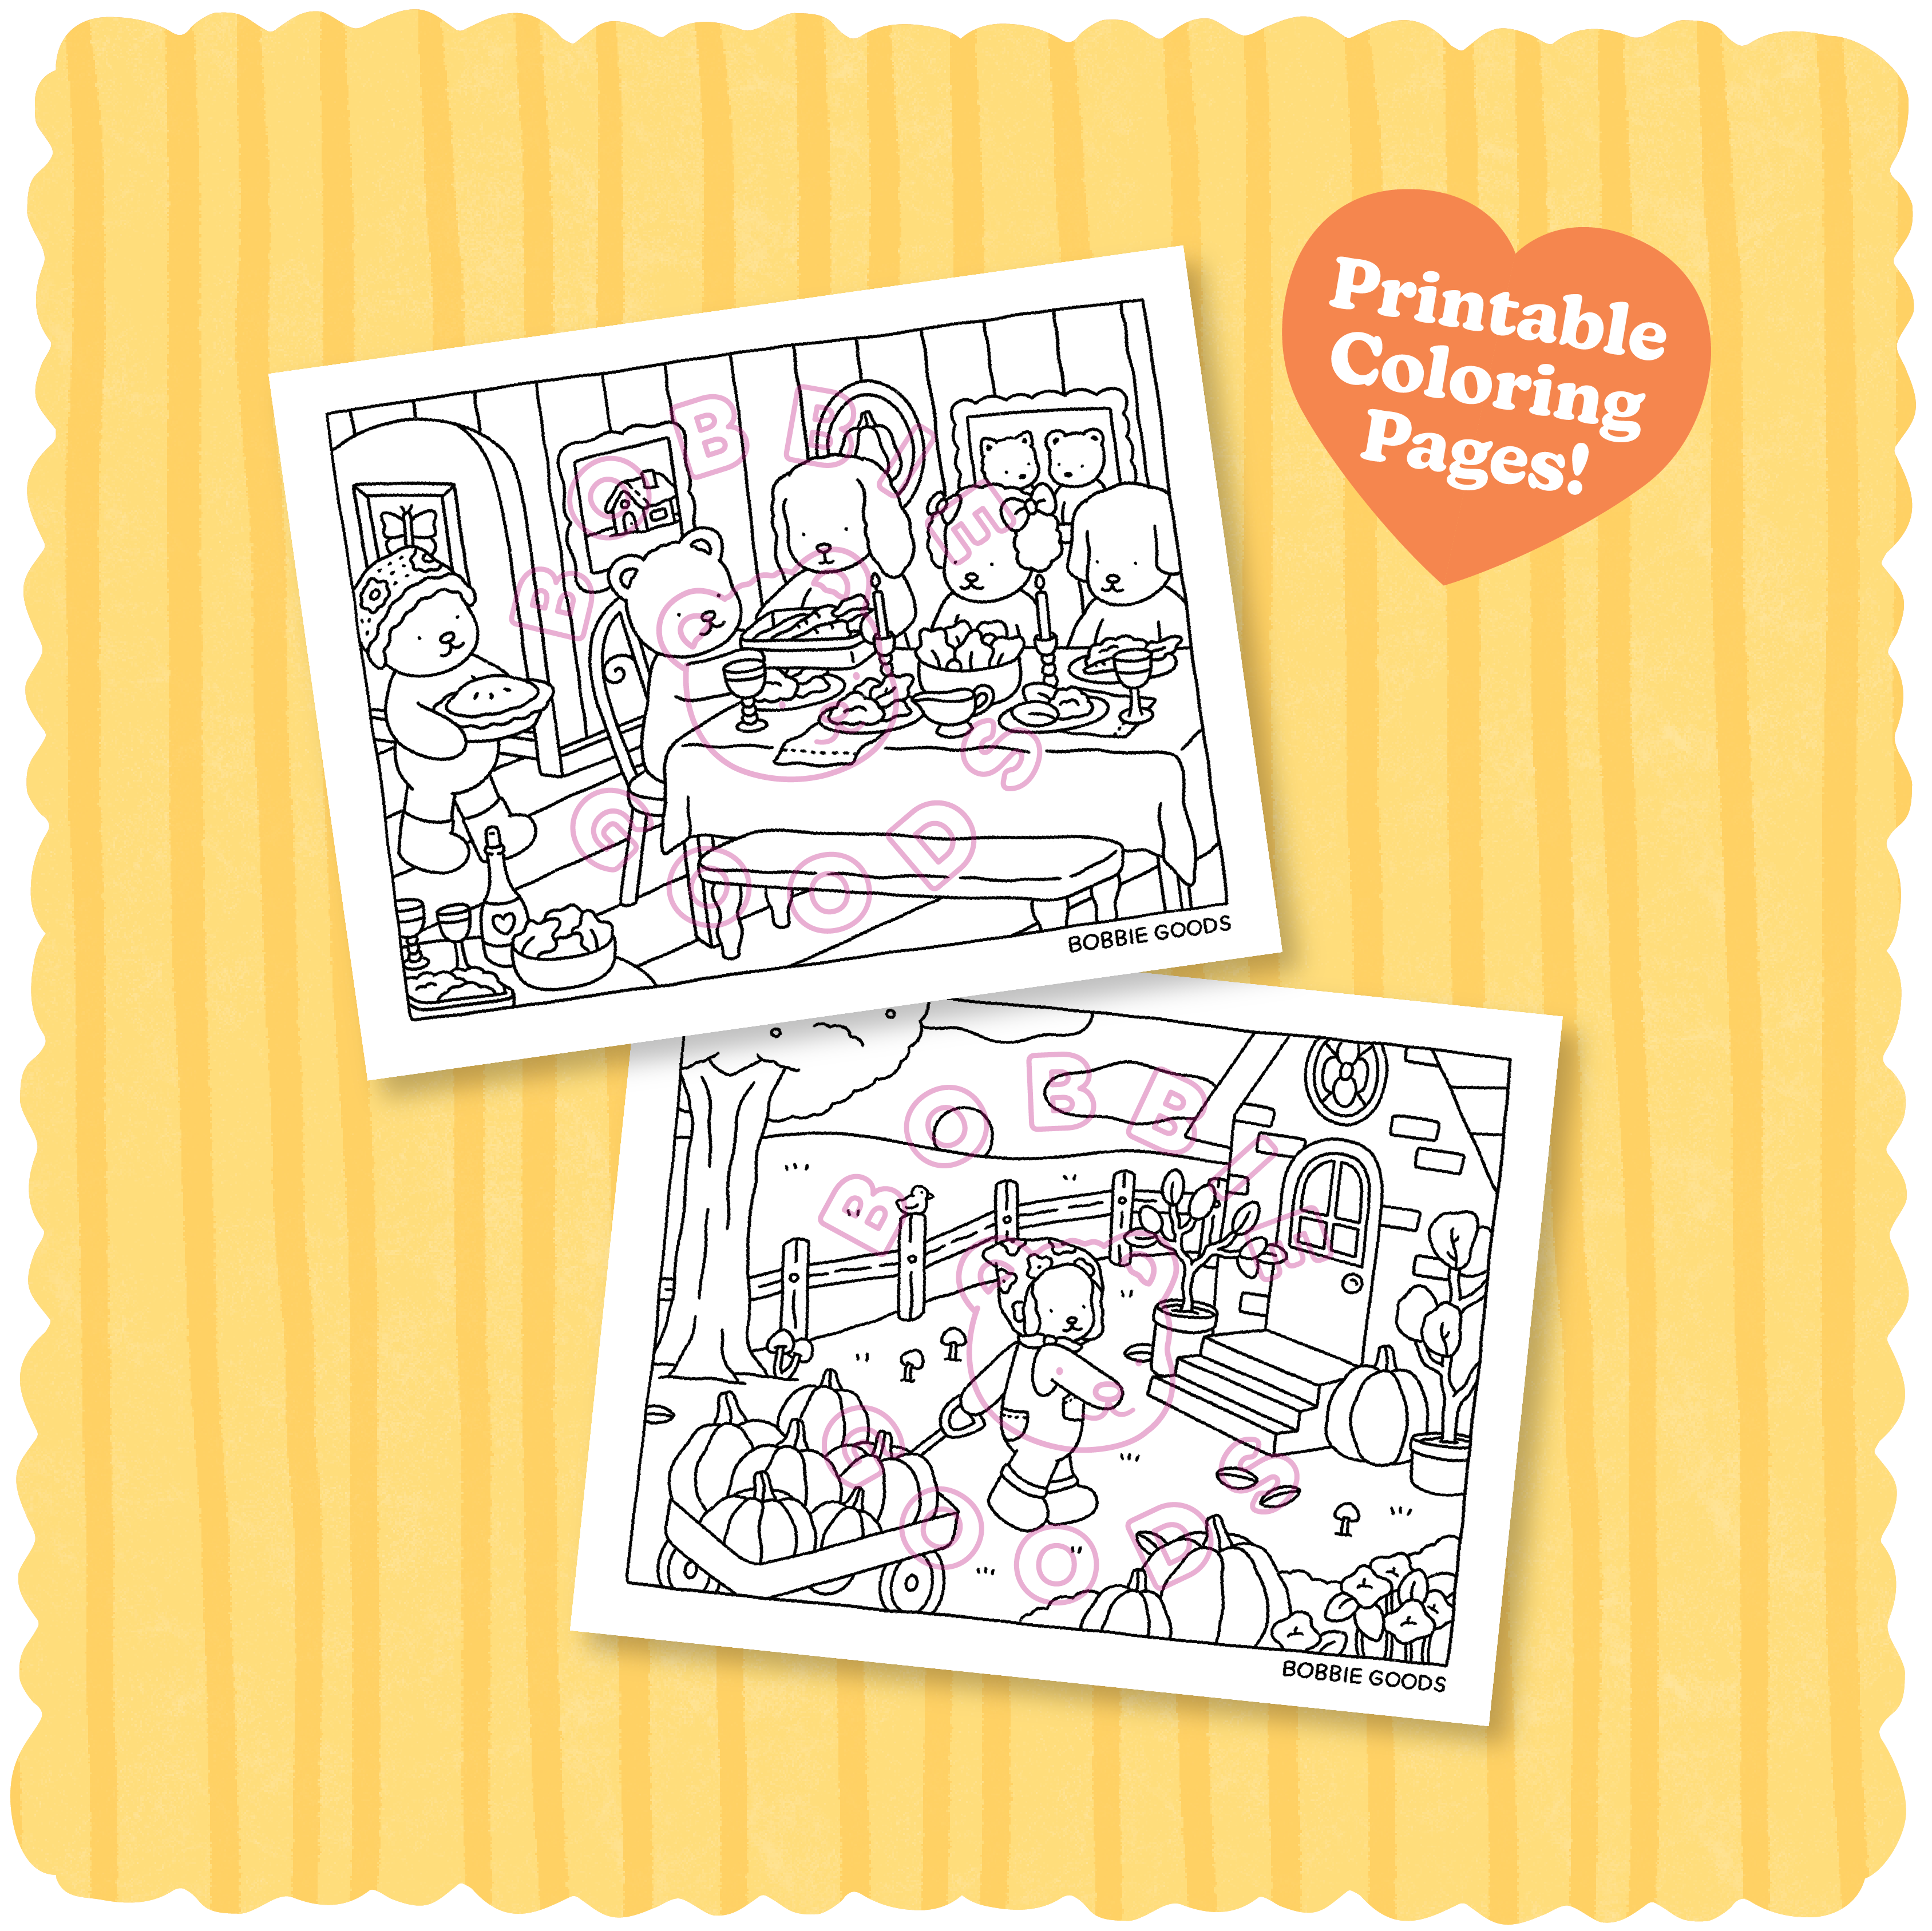 Bobbie Goods Coloring Book: Amazing boobiegoods Colouring Pages